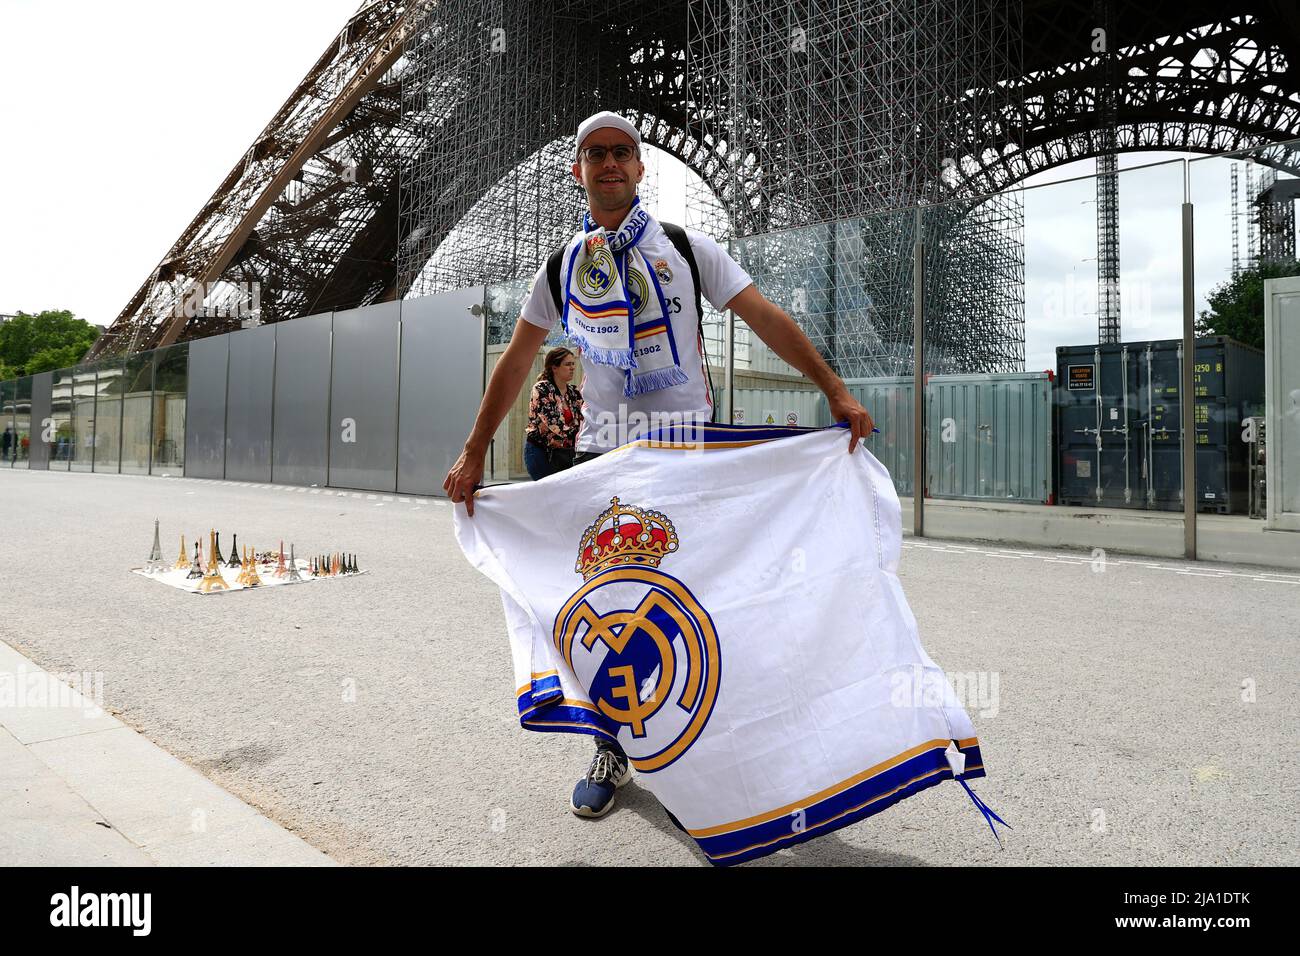 A general view of Real Madrid flags on display outside the stadium grounds  Stock Photo - Alamy